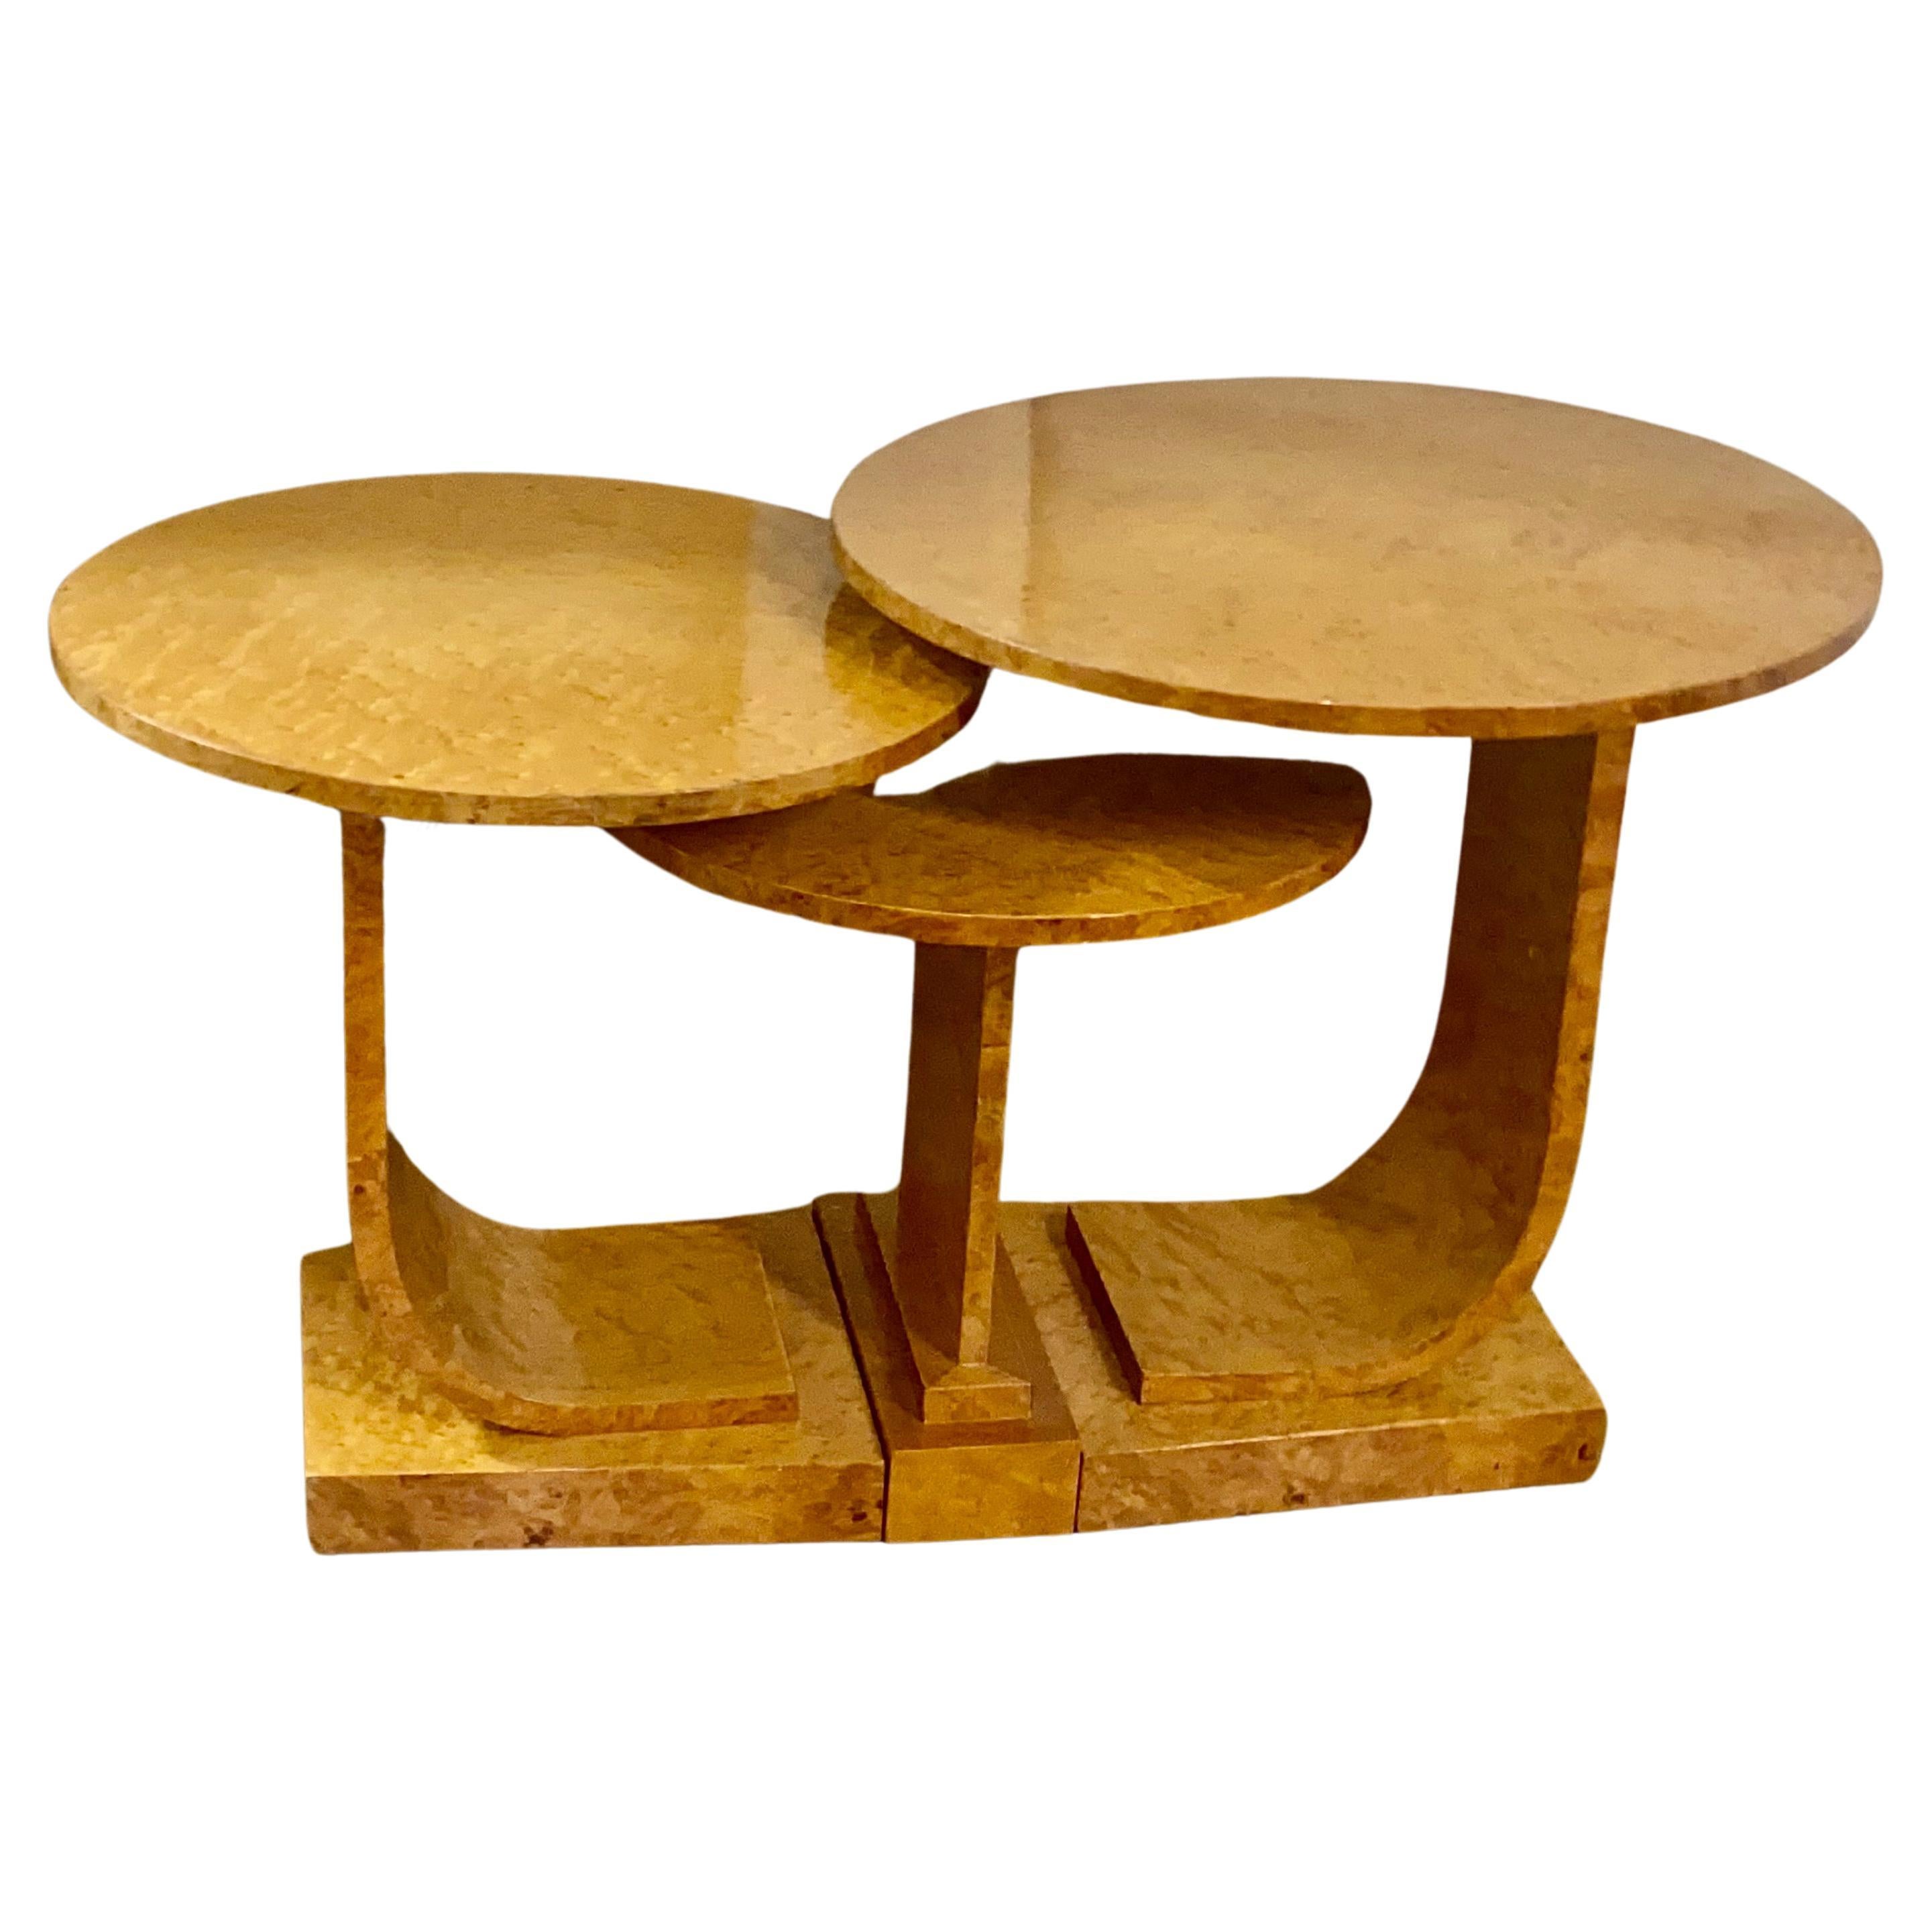 A Rare Art Deco Blonde Birds Eye Maple J Nest of Tables by Epstein Circa 1930 In Excellent Condition For Sale In London, GB